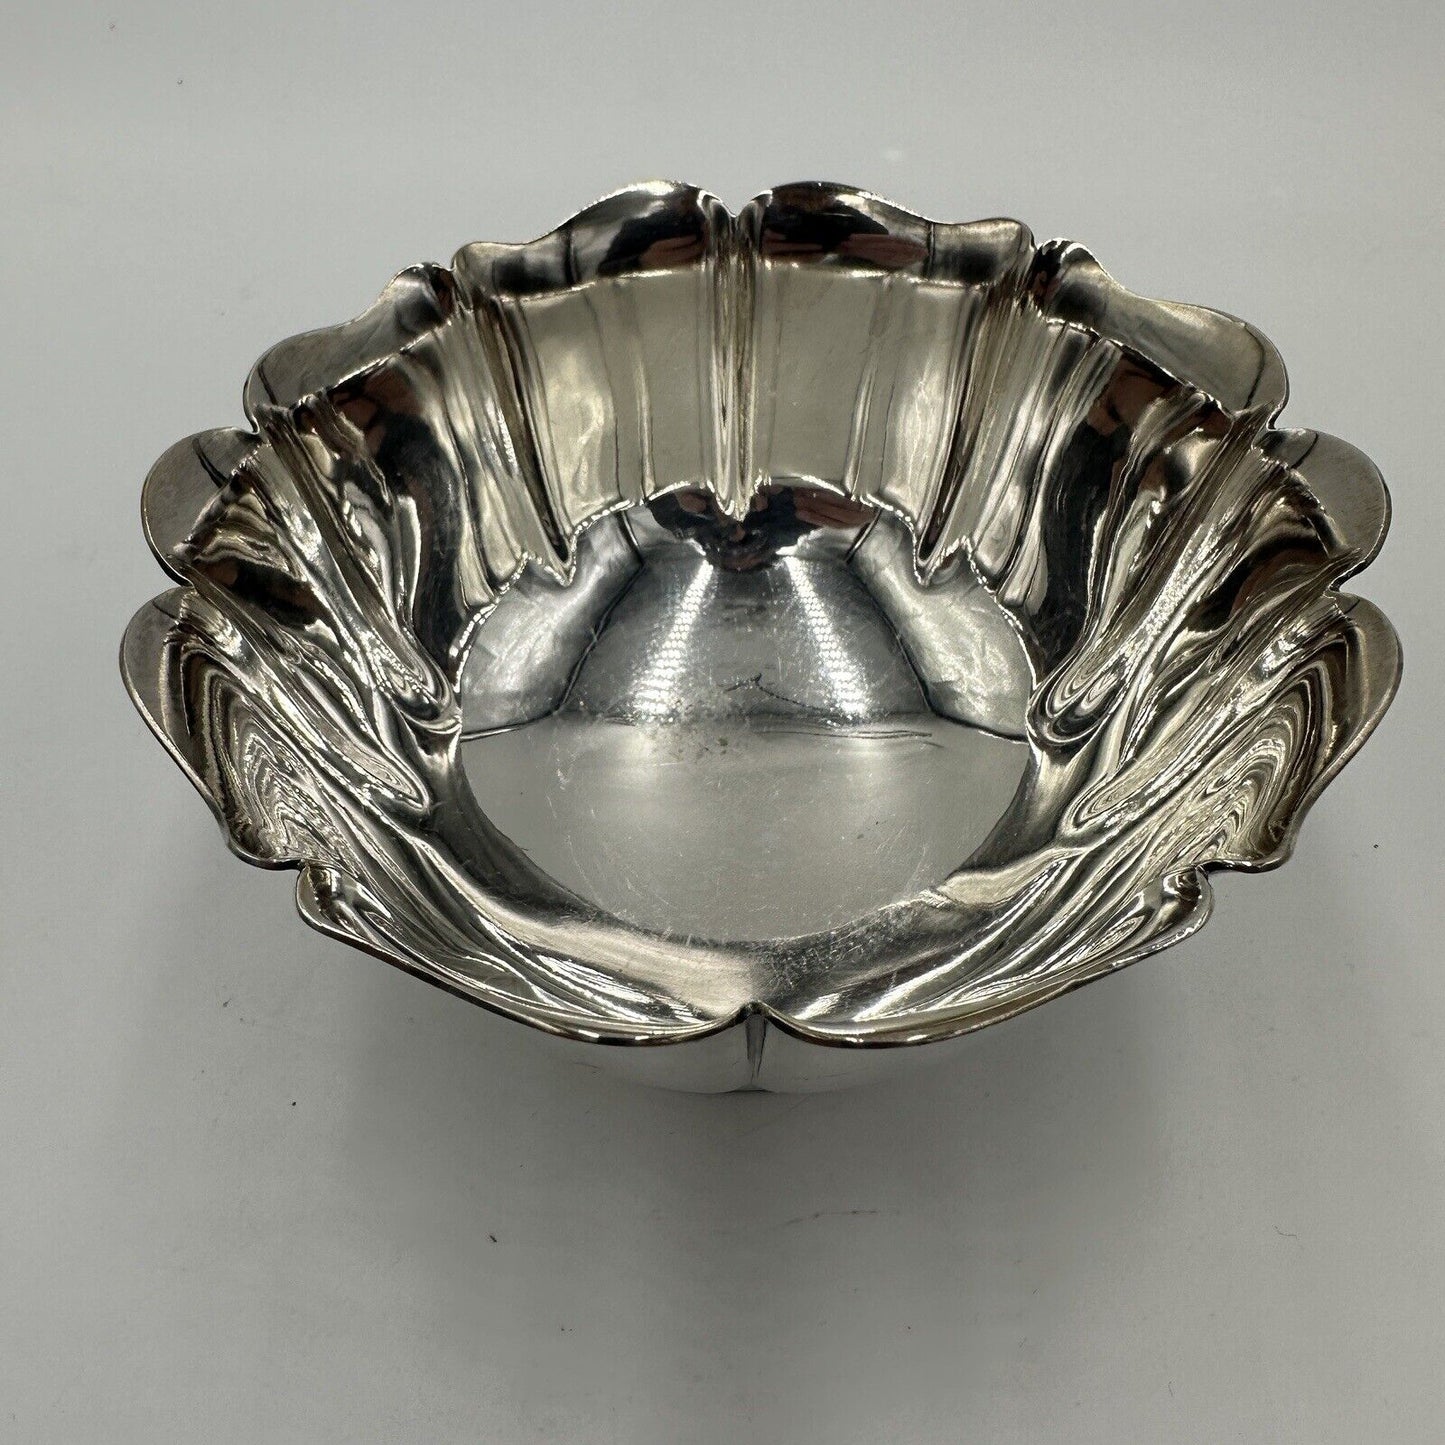 Antique Lawrence B Smith Lbs Co Silver plate Small Bowl 1897 Serveware Dining